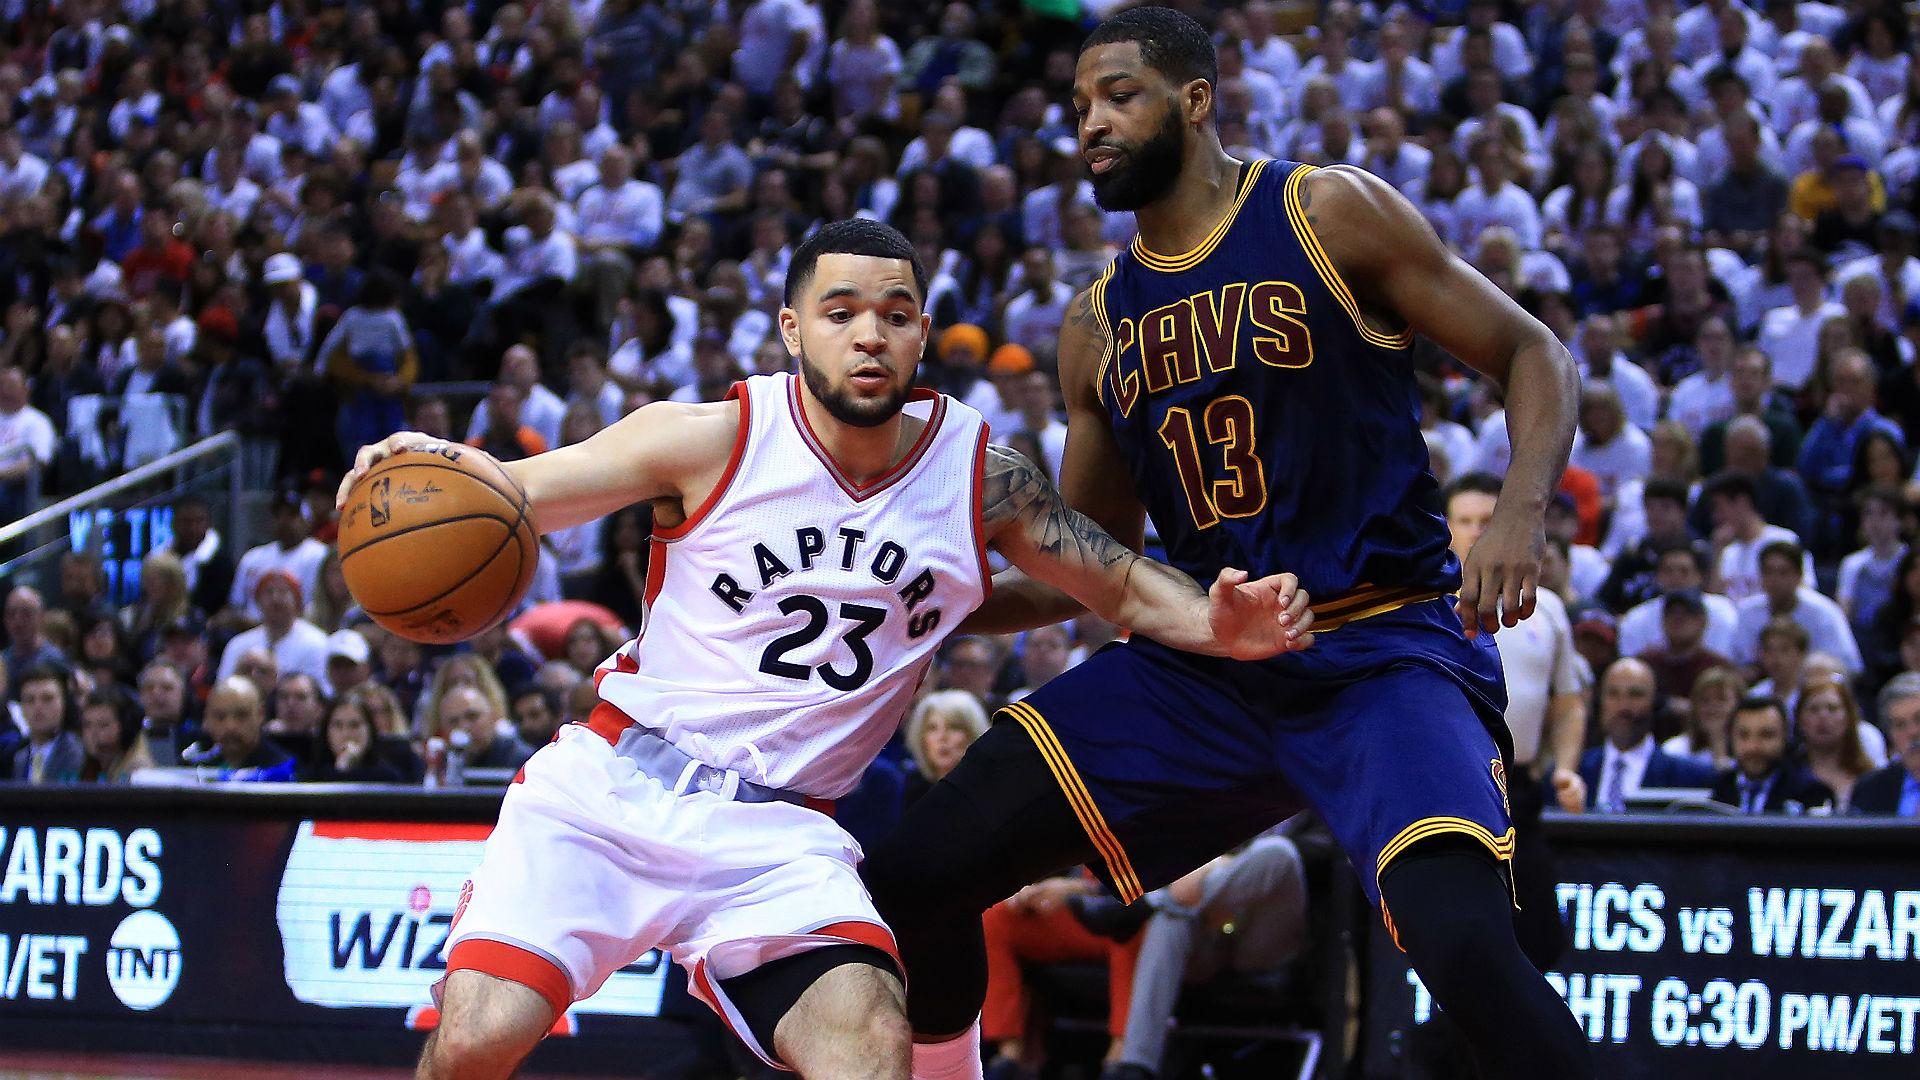 Raptors guard VanVleet ready for larger role in Wright's absence